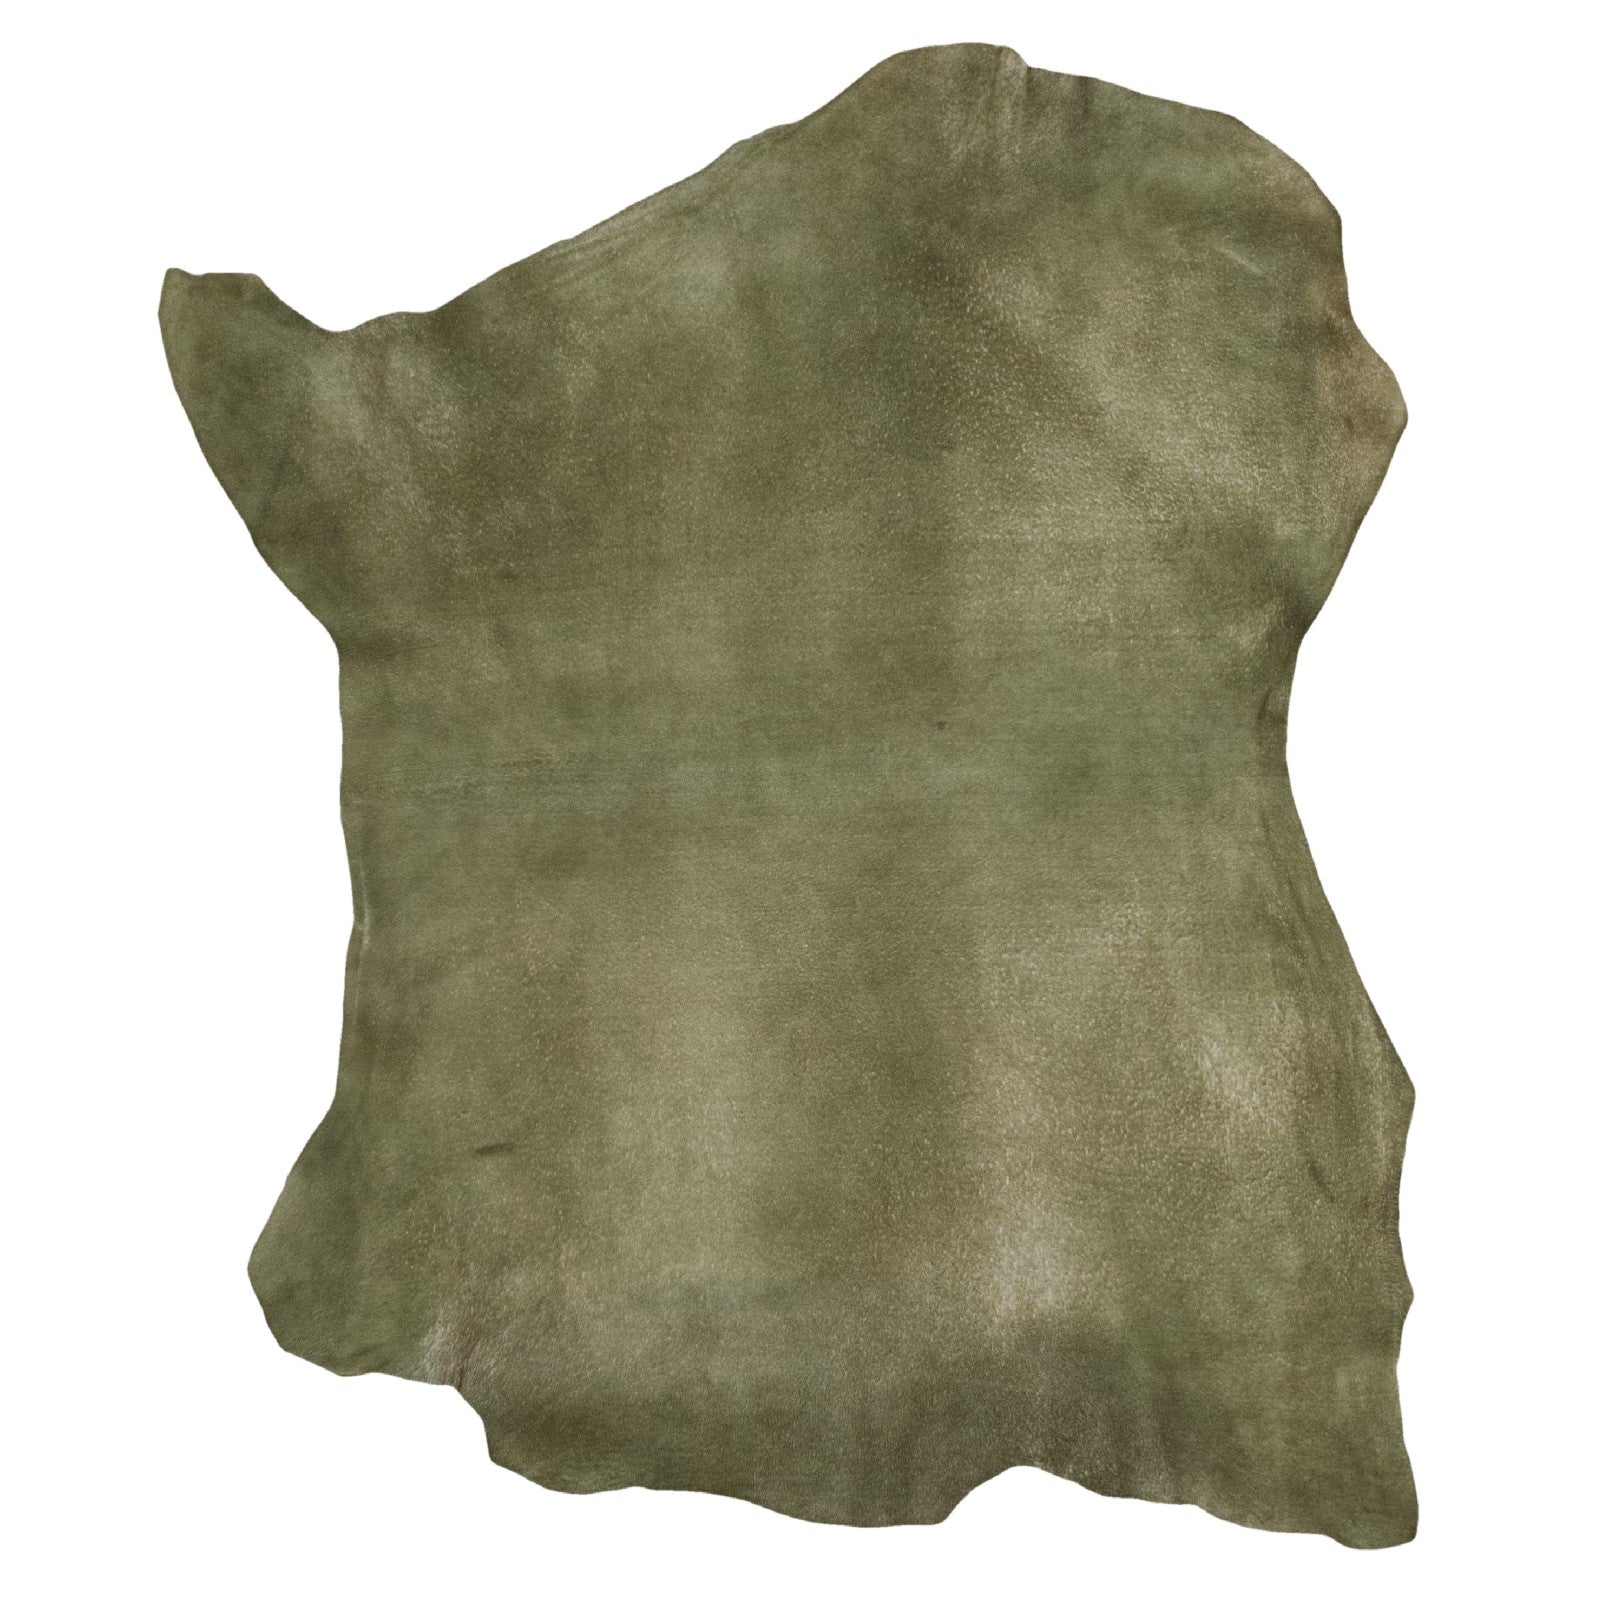 Denim Dyed, 4-7 Sq Ft, Lamb Hides, Dark Green 1 | The Leather Guy